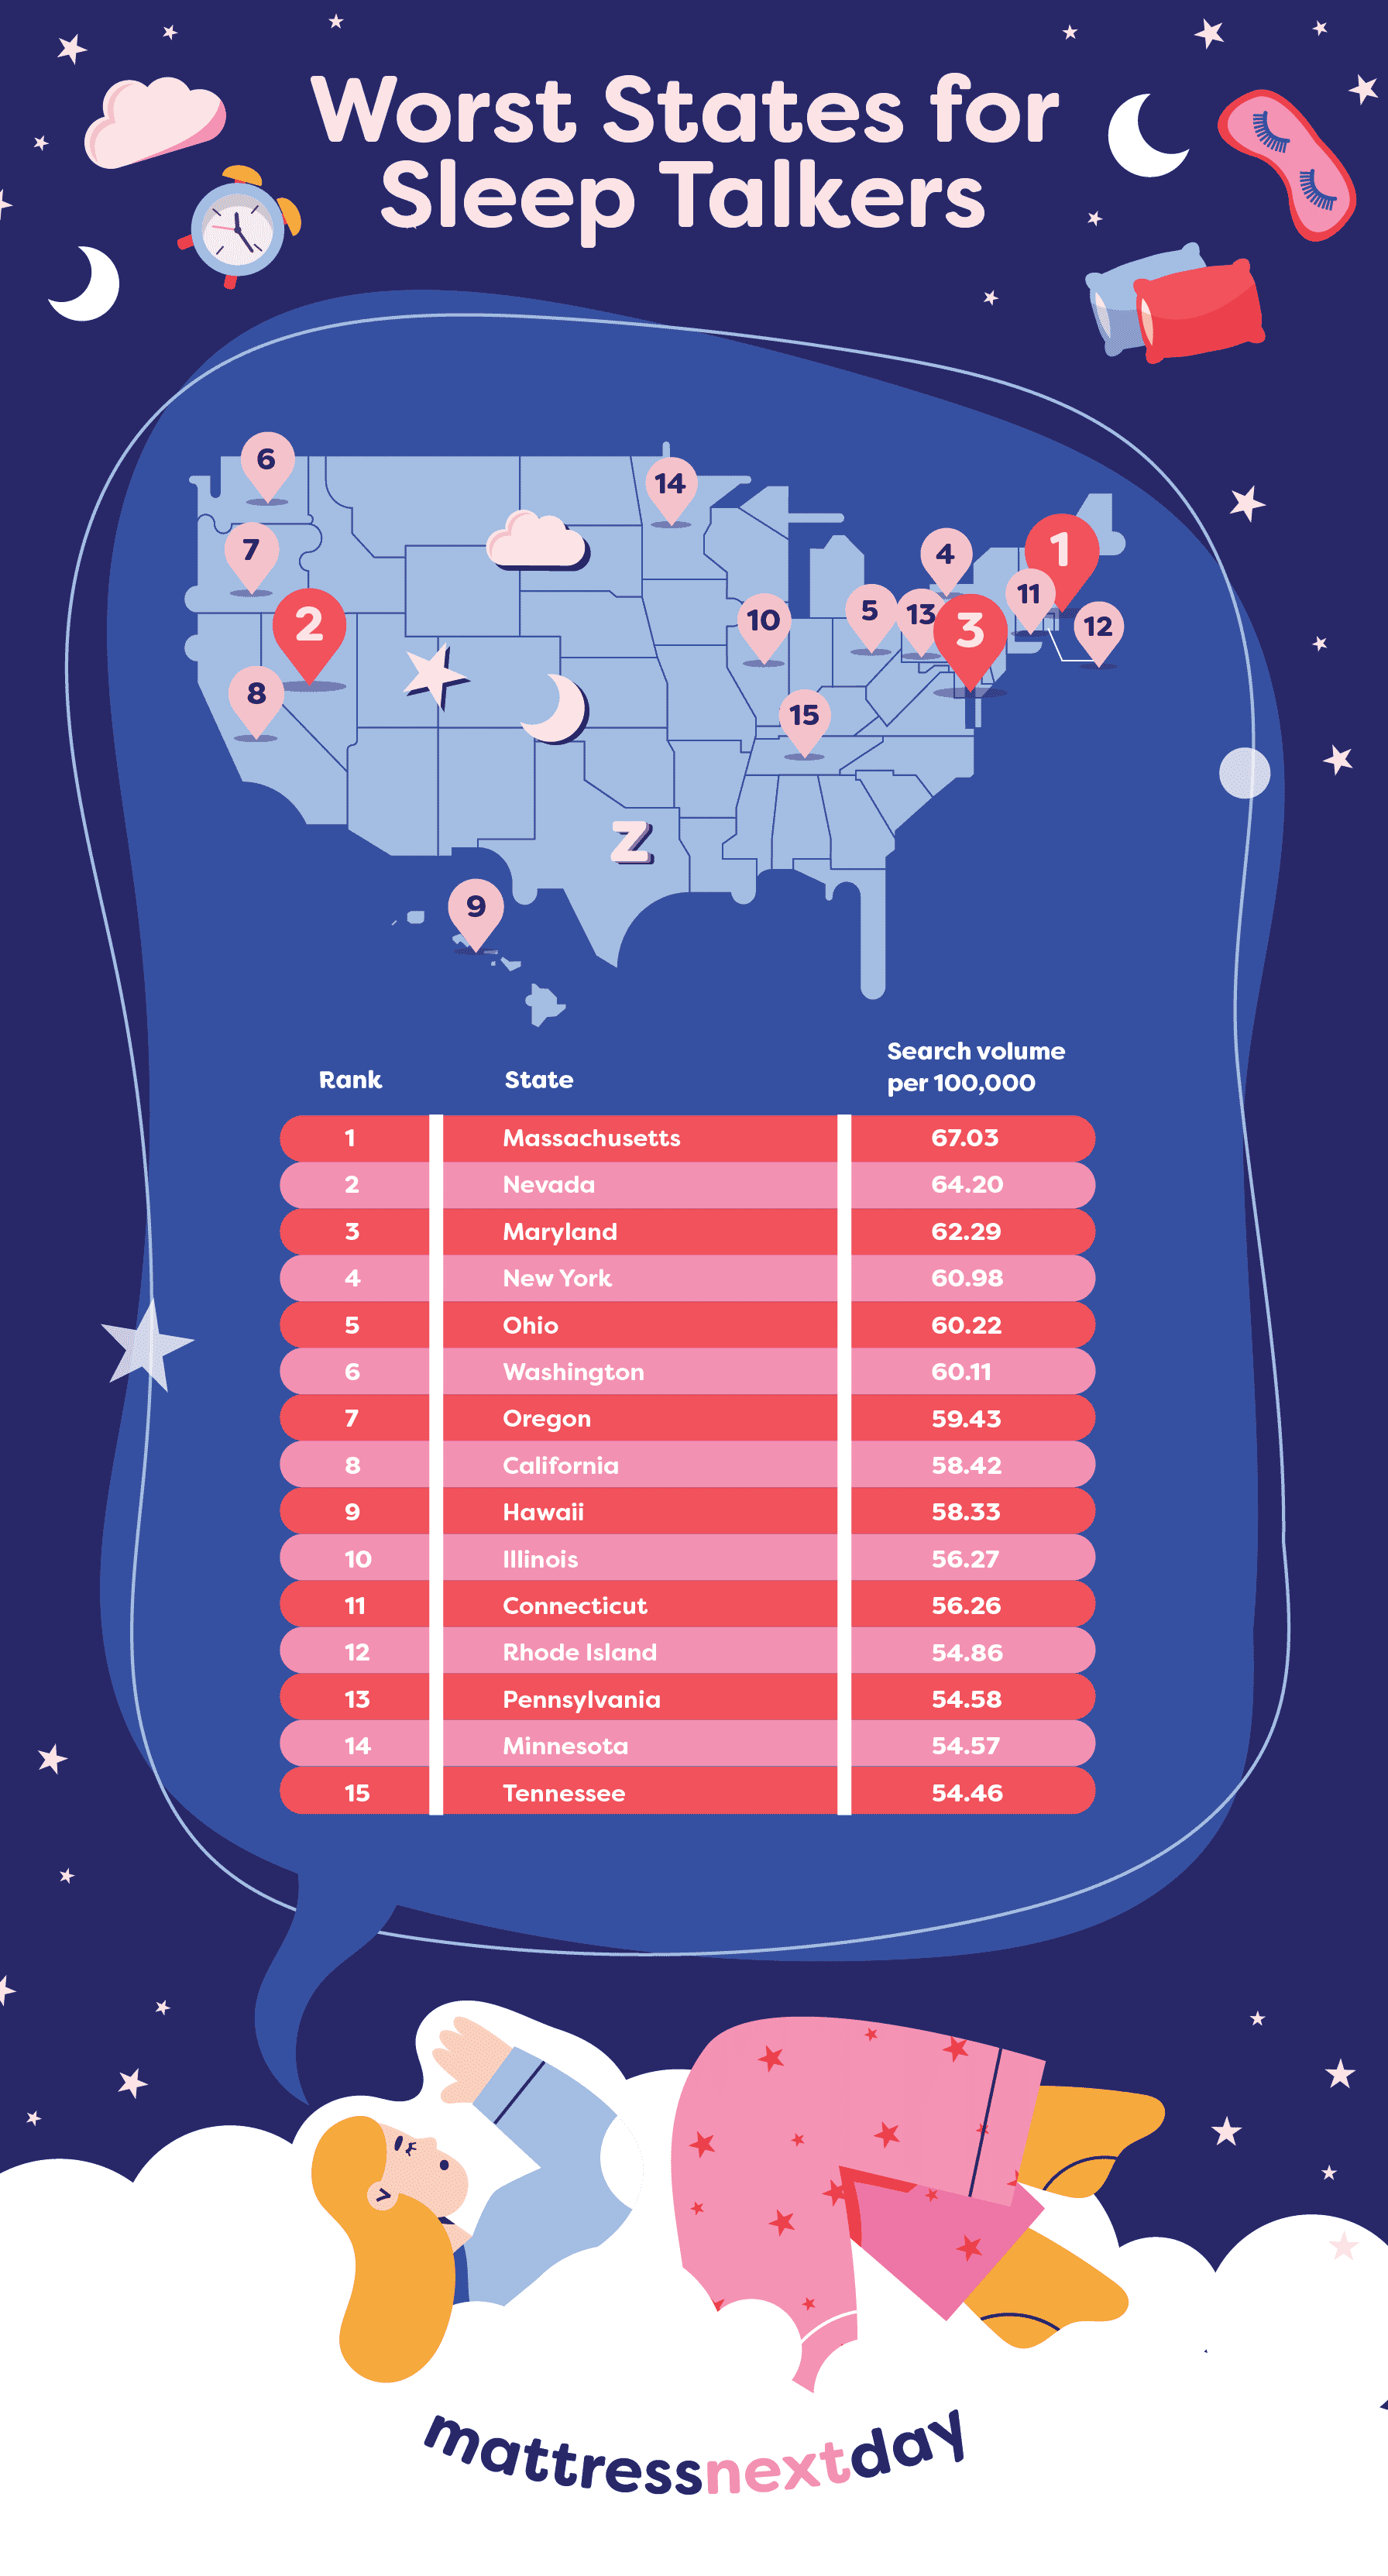 Infographic depicting the US states with the most sleep talkers based on internet search volume.